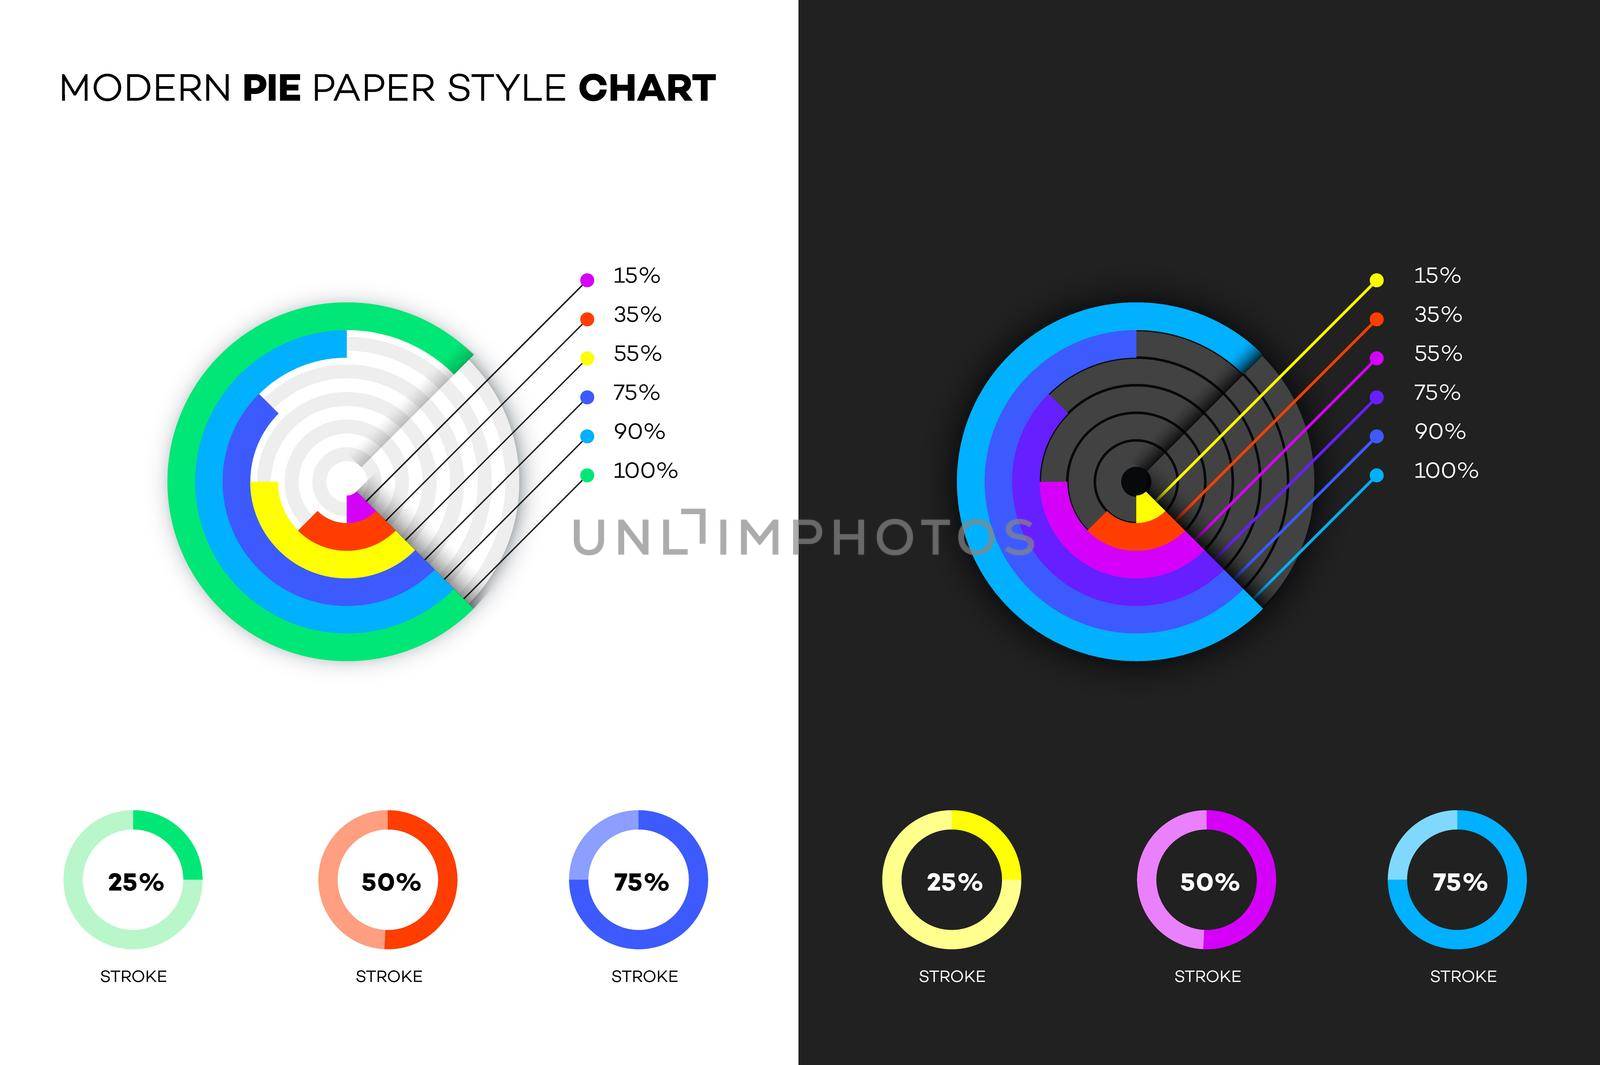 Modern Paper Style Pie Chart. Vector Template And Mockup For Your Business Brochure, Infogrphics Or Presentation Design by Yarkee